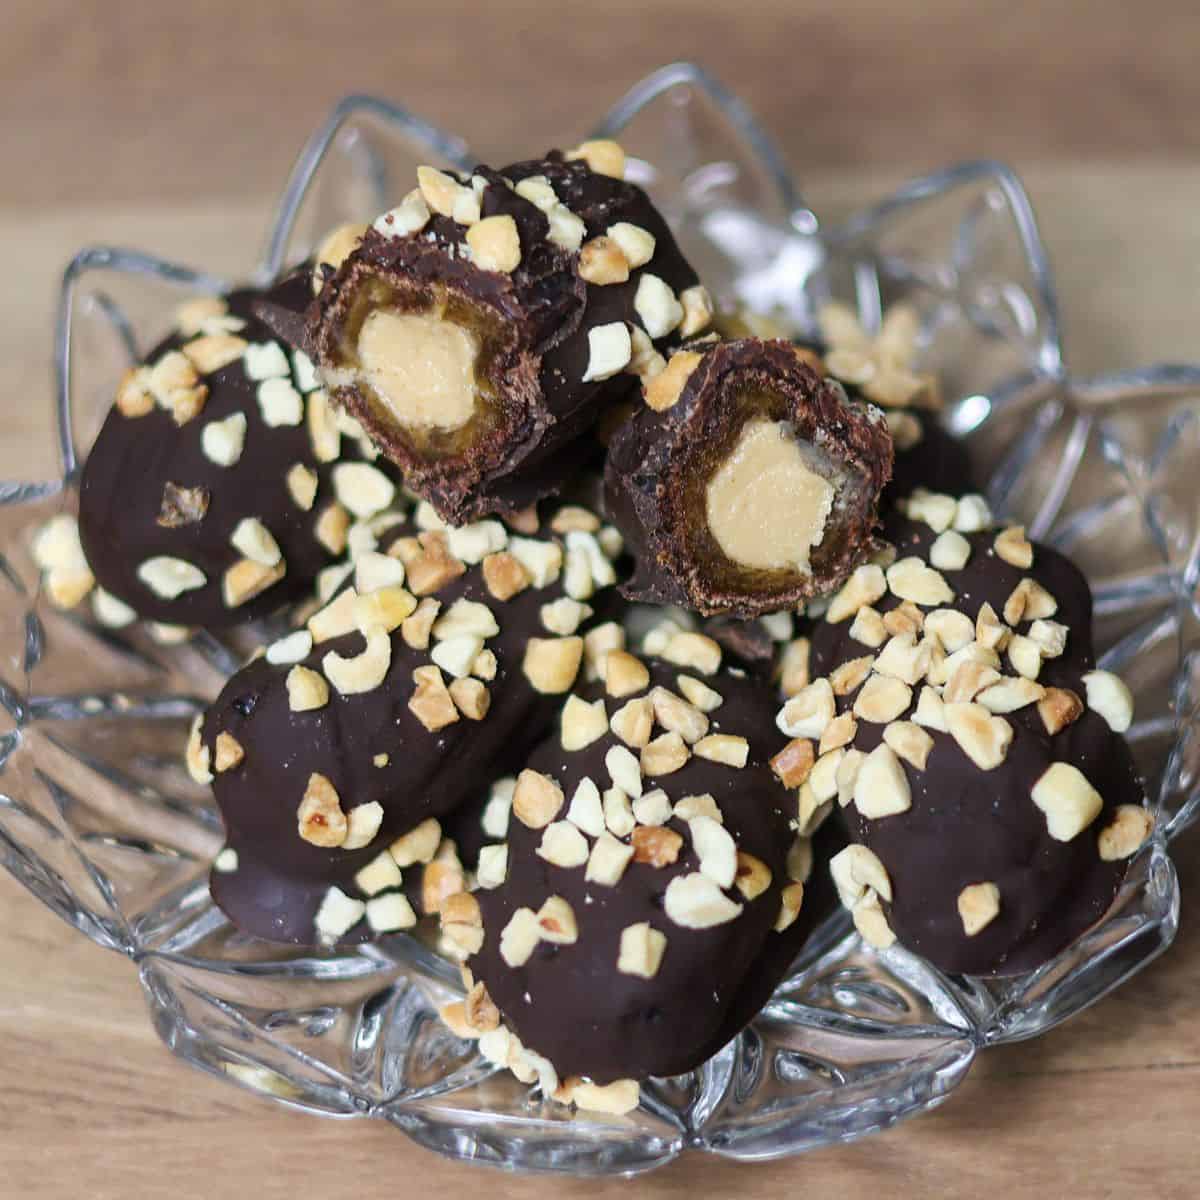 Several chocolate covered dates with peanut butter filling and nut toppings arranged neatly on a glass dish.